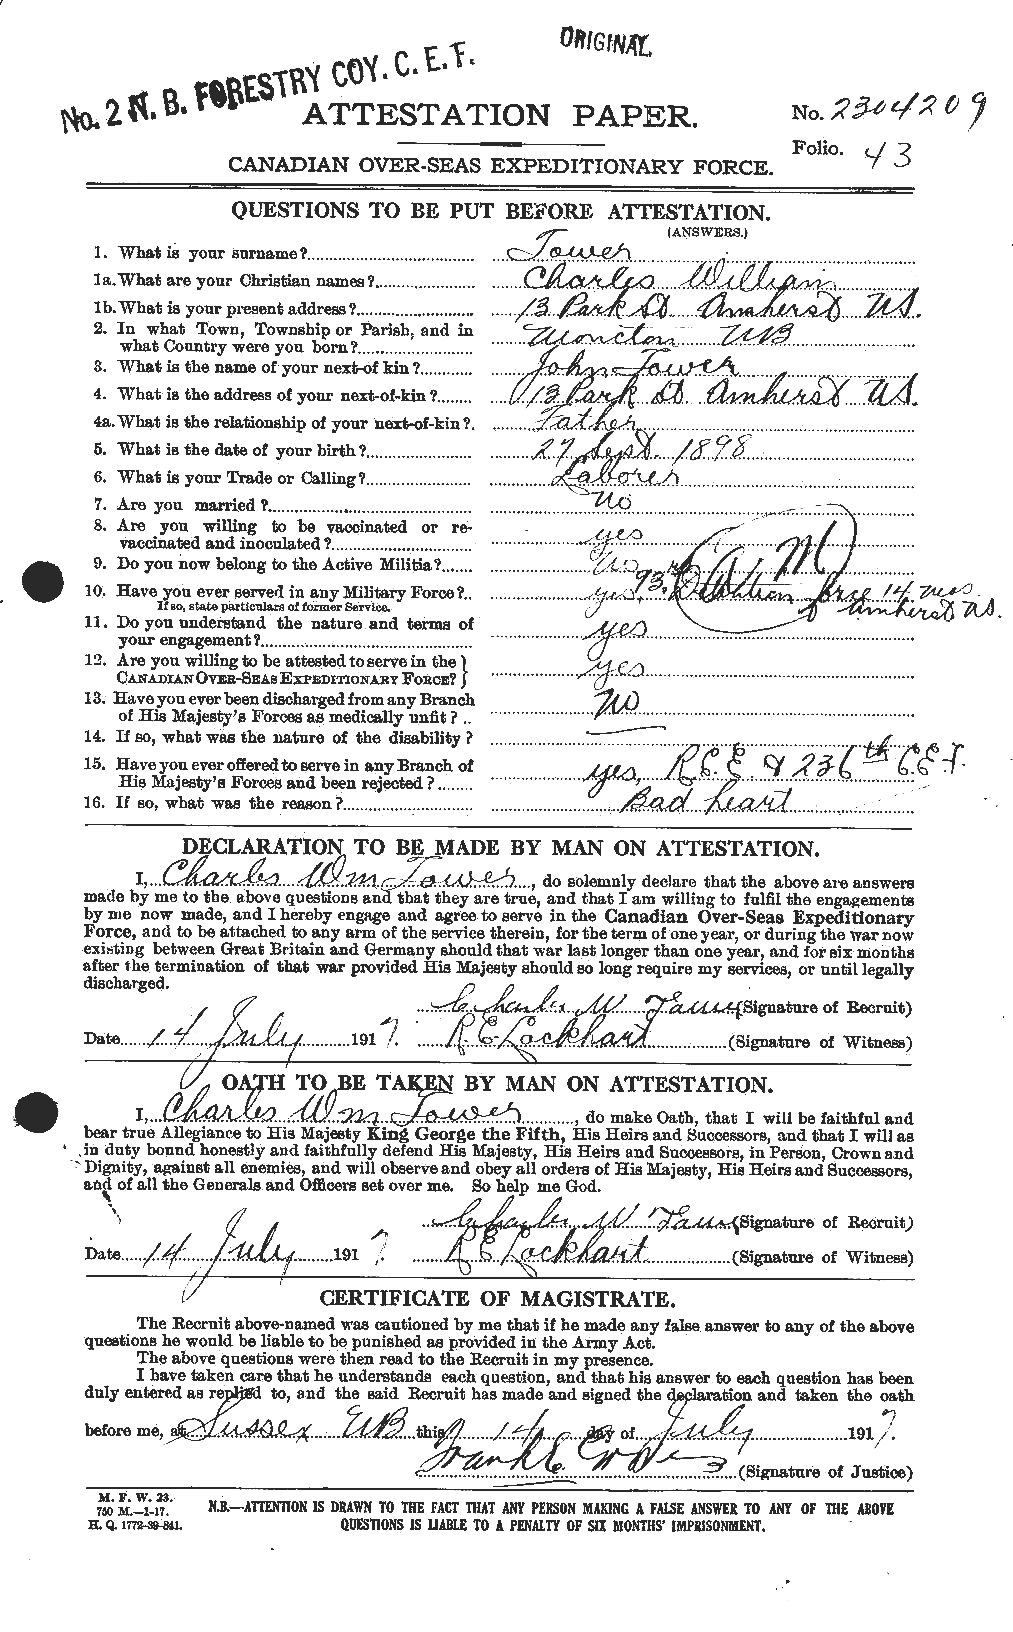 Personnel Records of the First World War - CEF 636184a